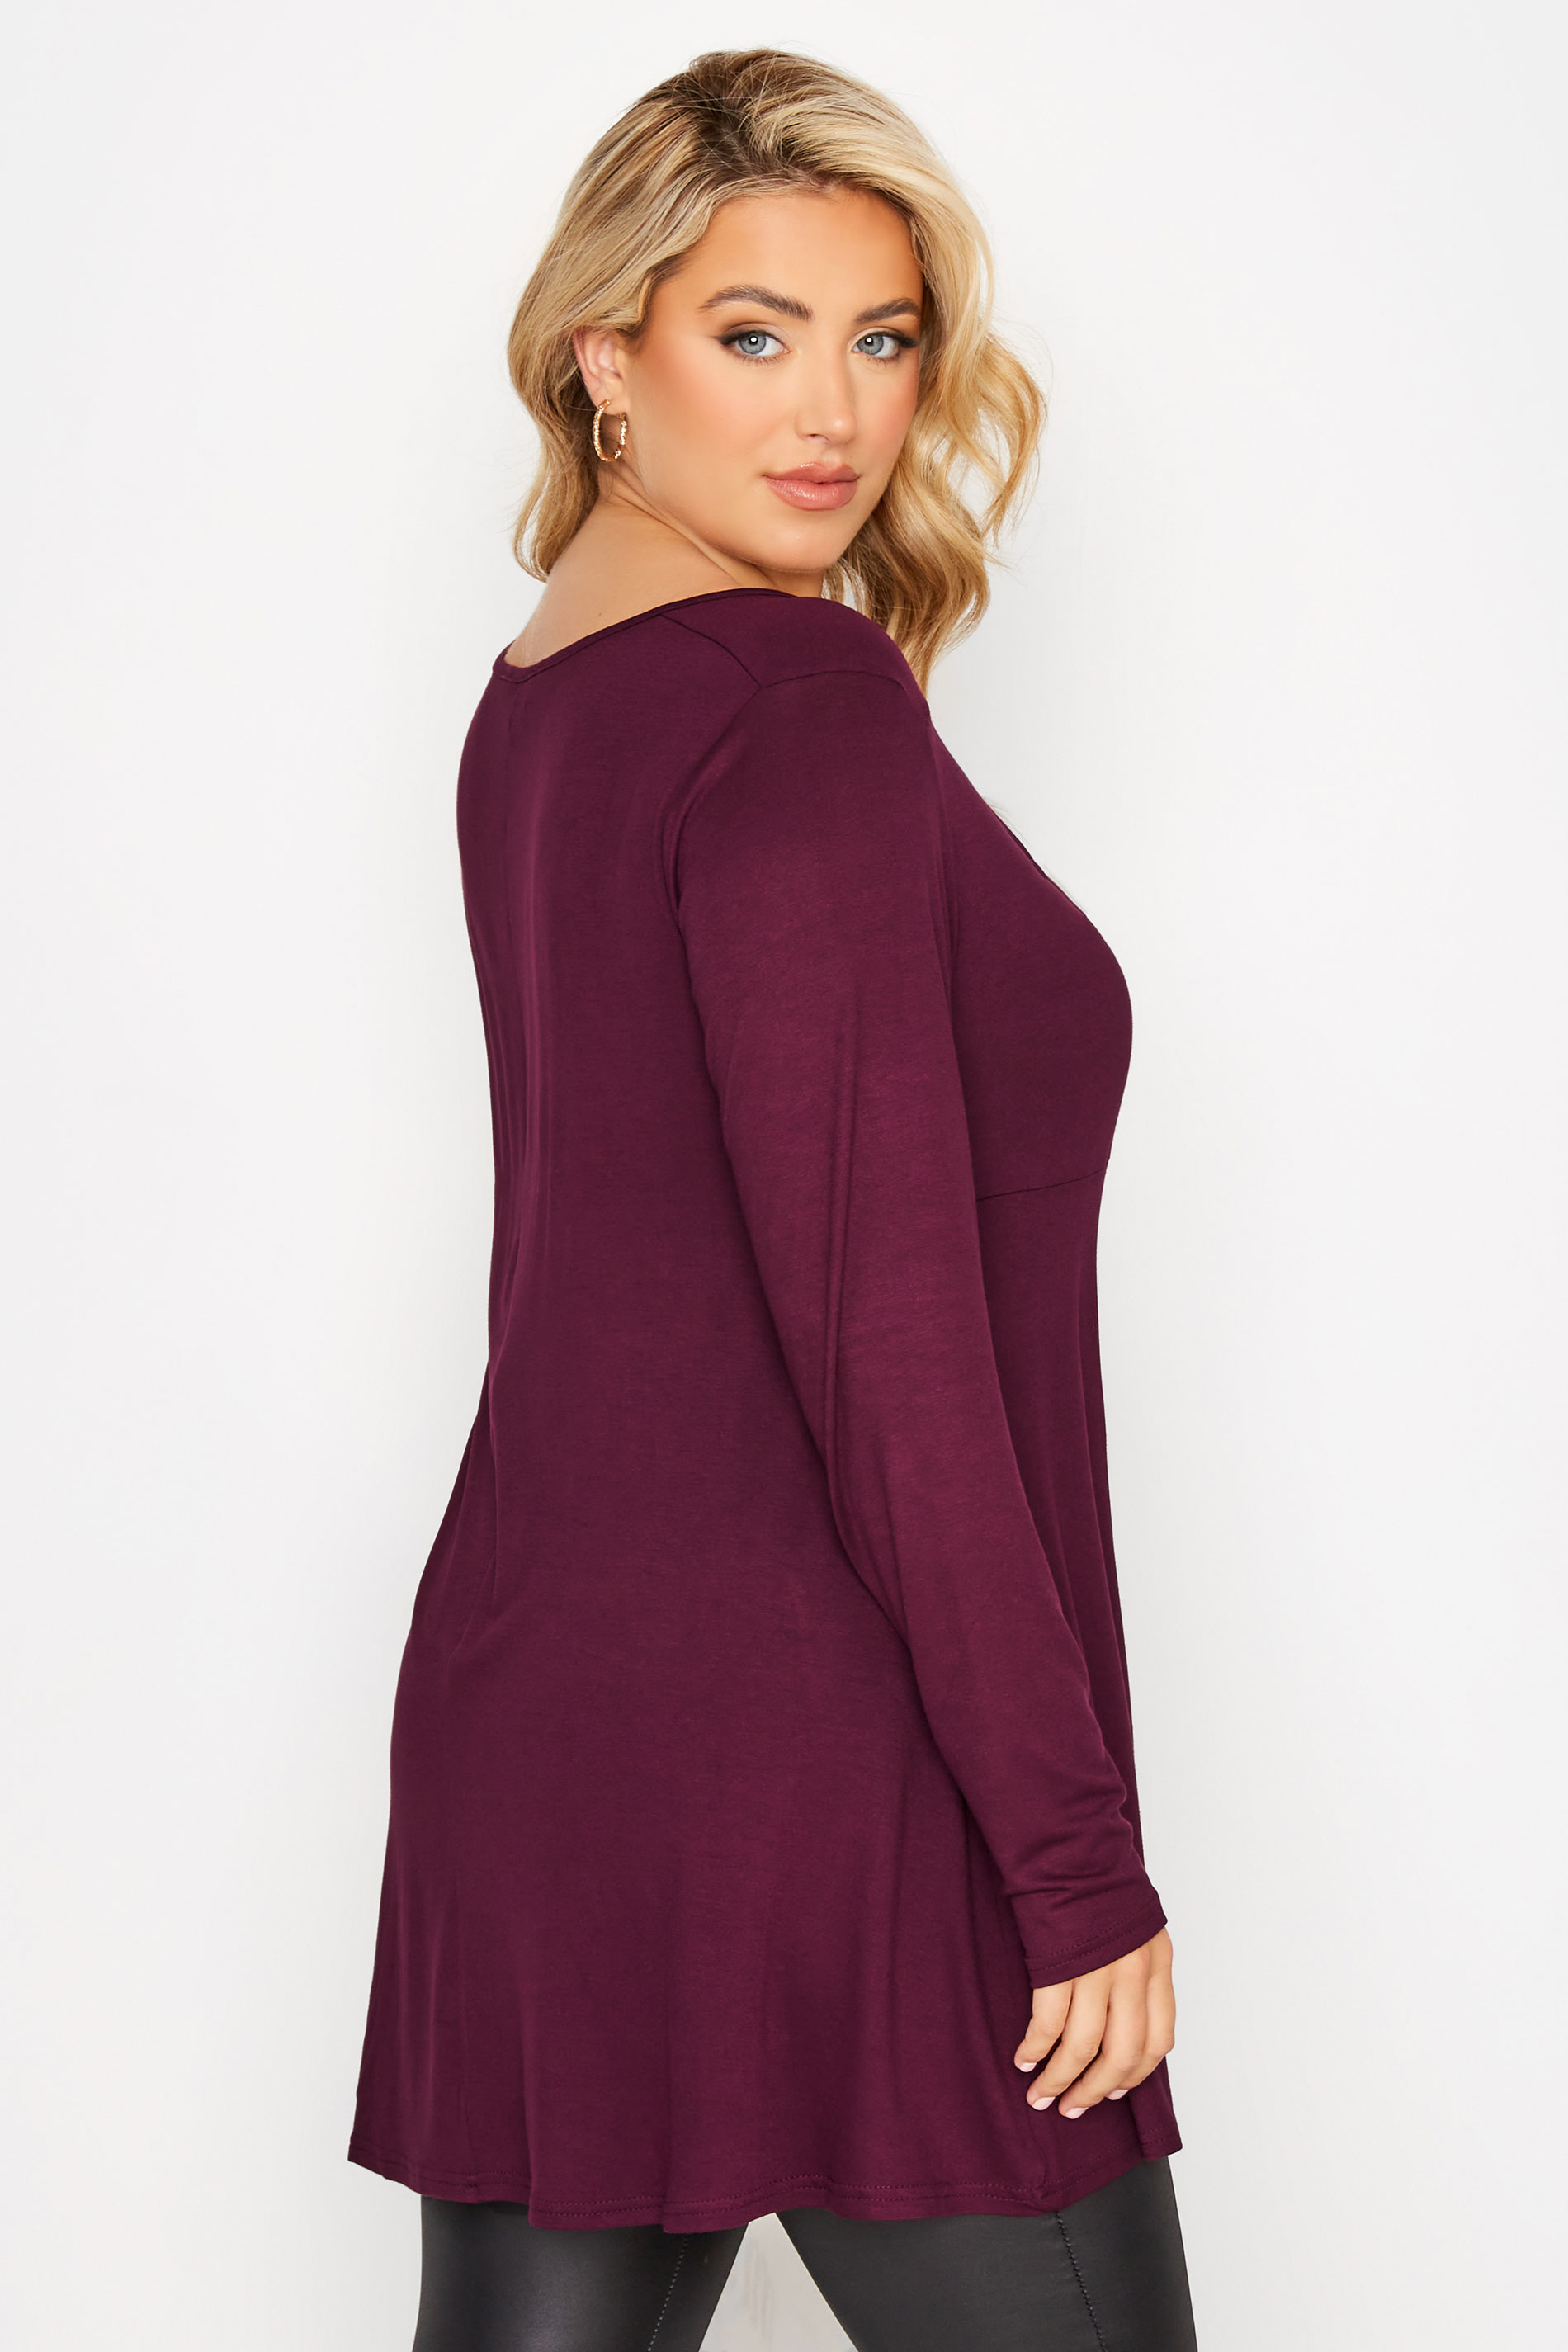 LIMITED COLLECTION Plus Size Berry Red Keyhole Tie Neckline Swing Top | Yours Clothing 3